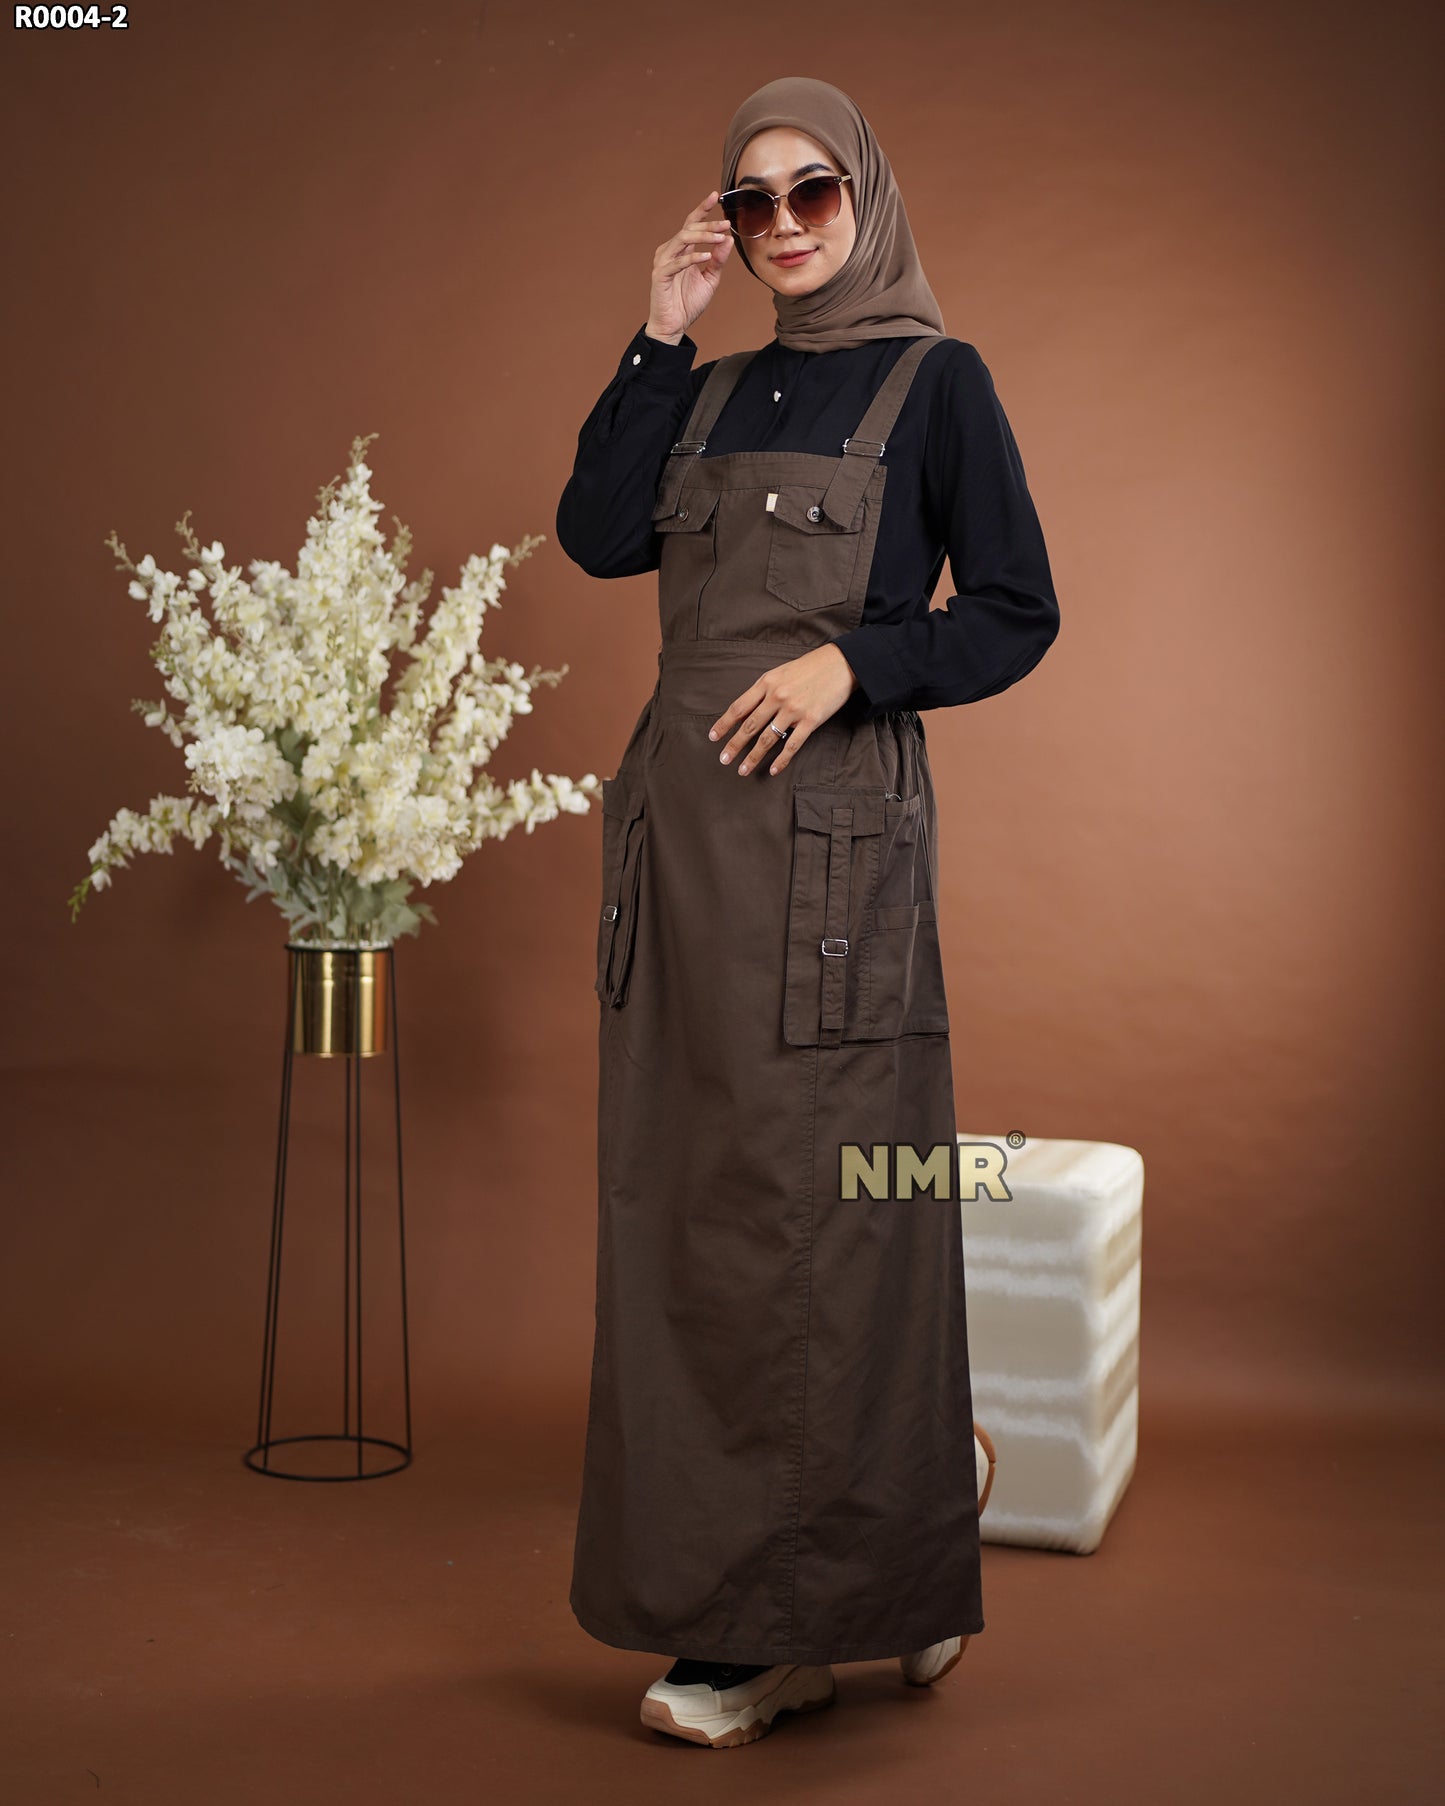 NMR Gamis Jumpsuit Overall Baby Canvas Vol R004-2